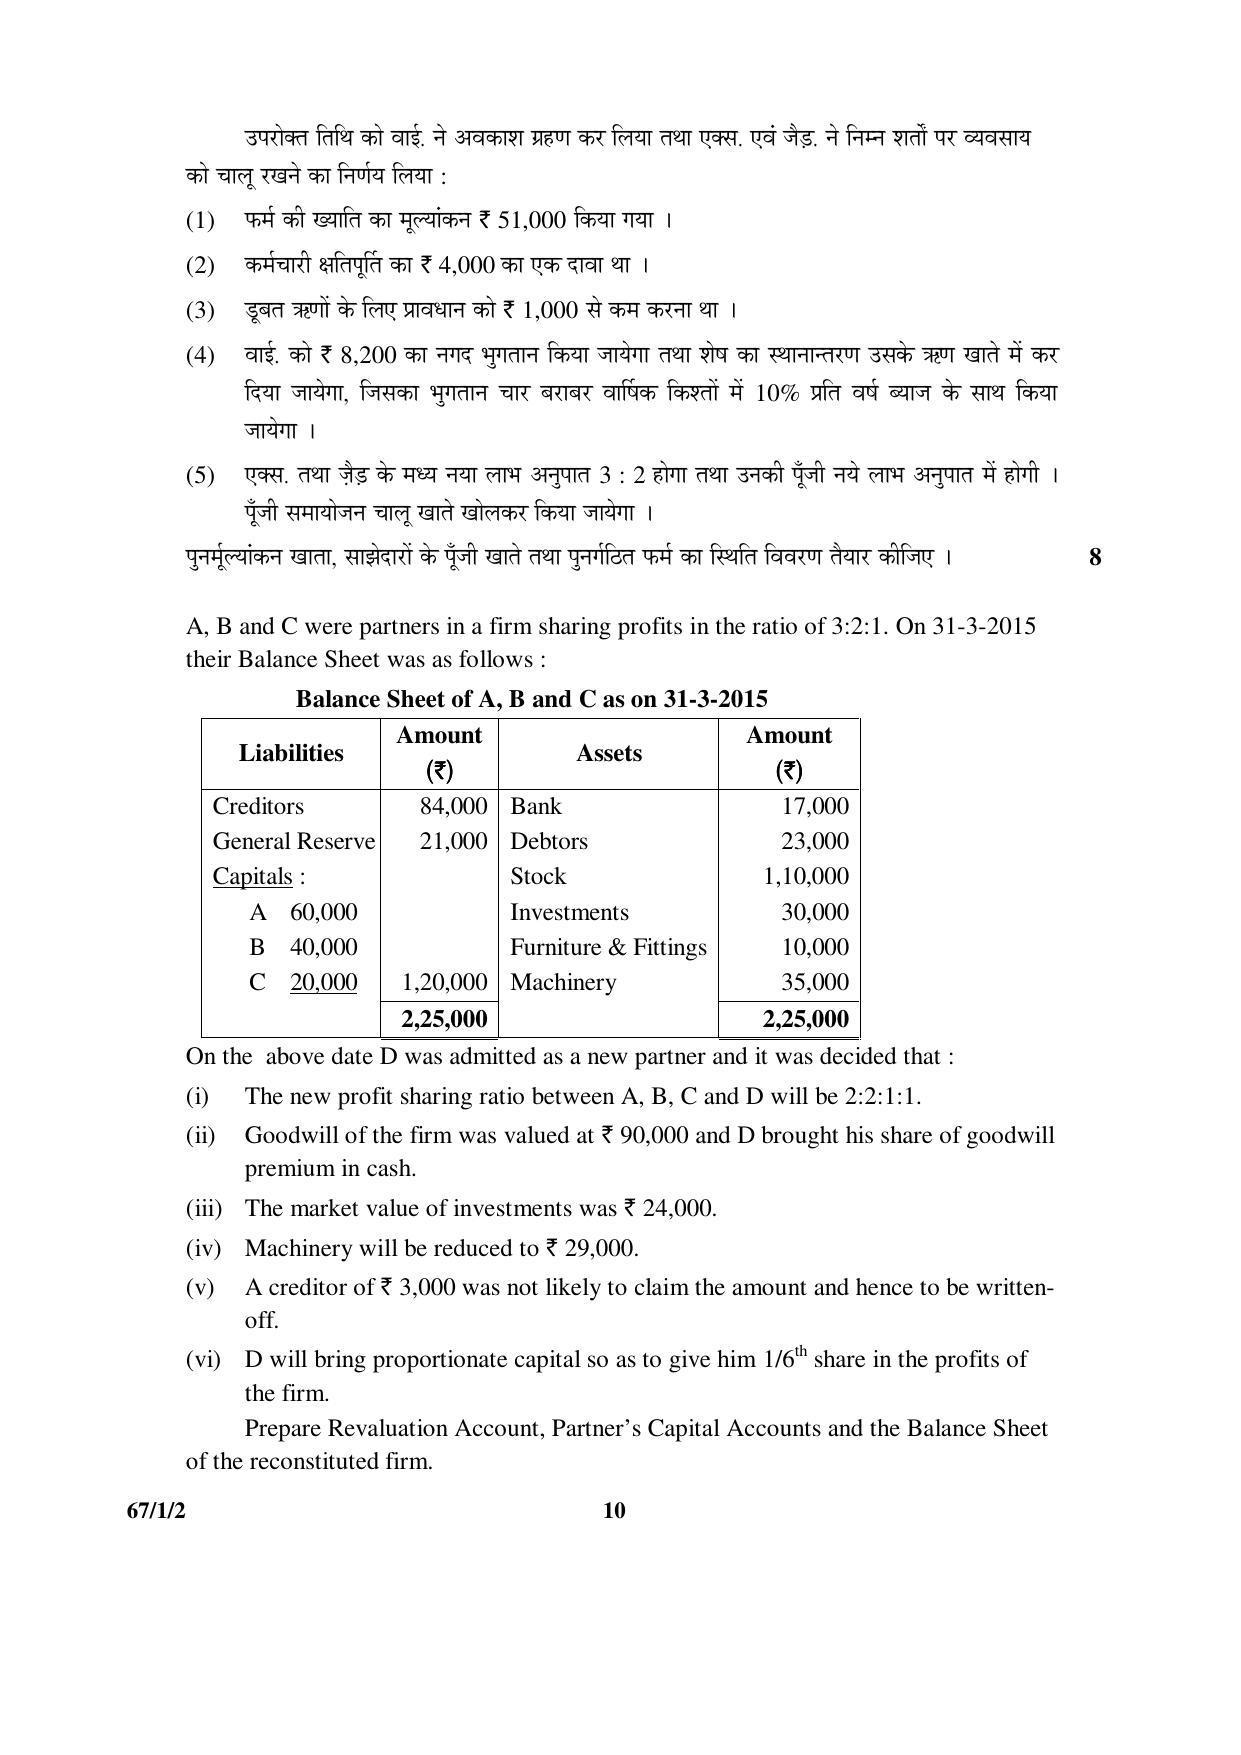 CBSE Class 12 67-1-2 ACCOUNTANCY 2016 Question Paper - Page 10